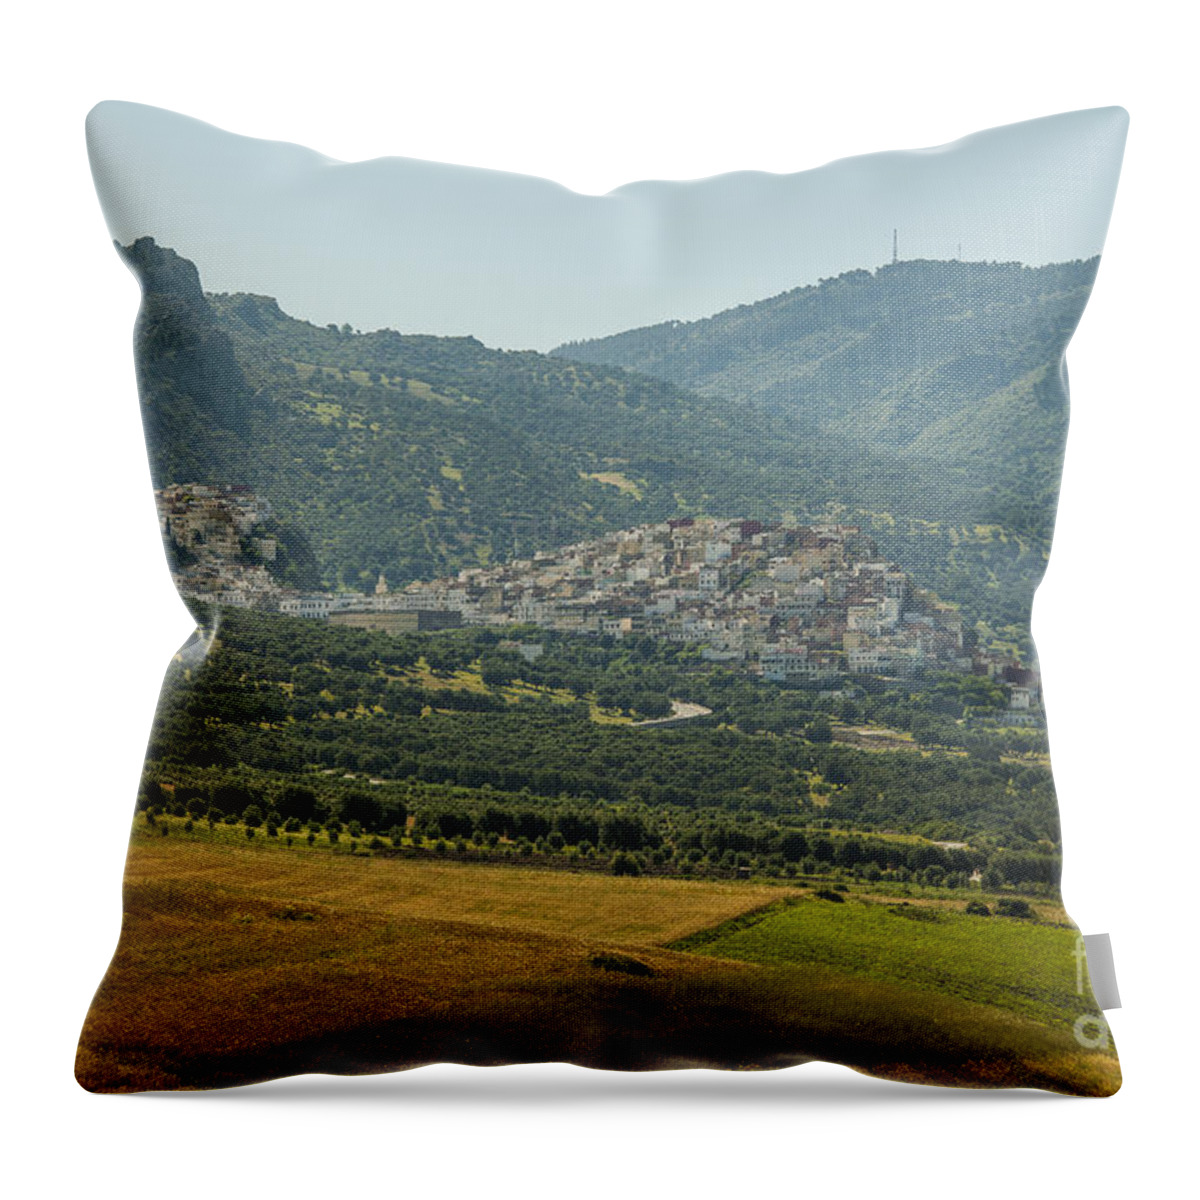 Africa Throw Pillow featuring the photograph Moulay Idriss by Patricia Hofmeester